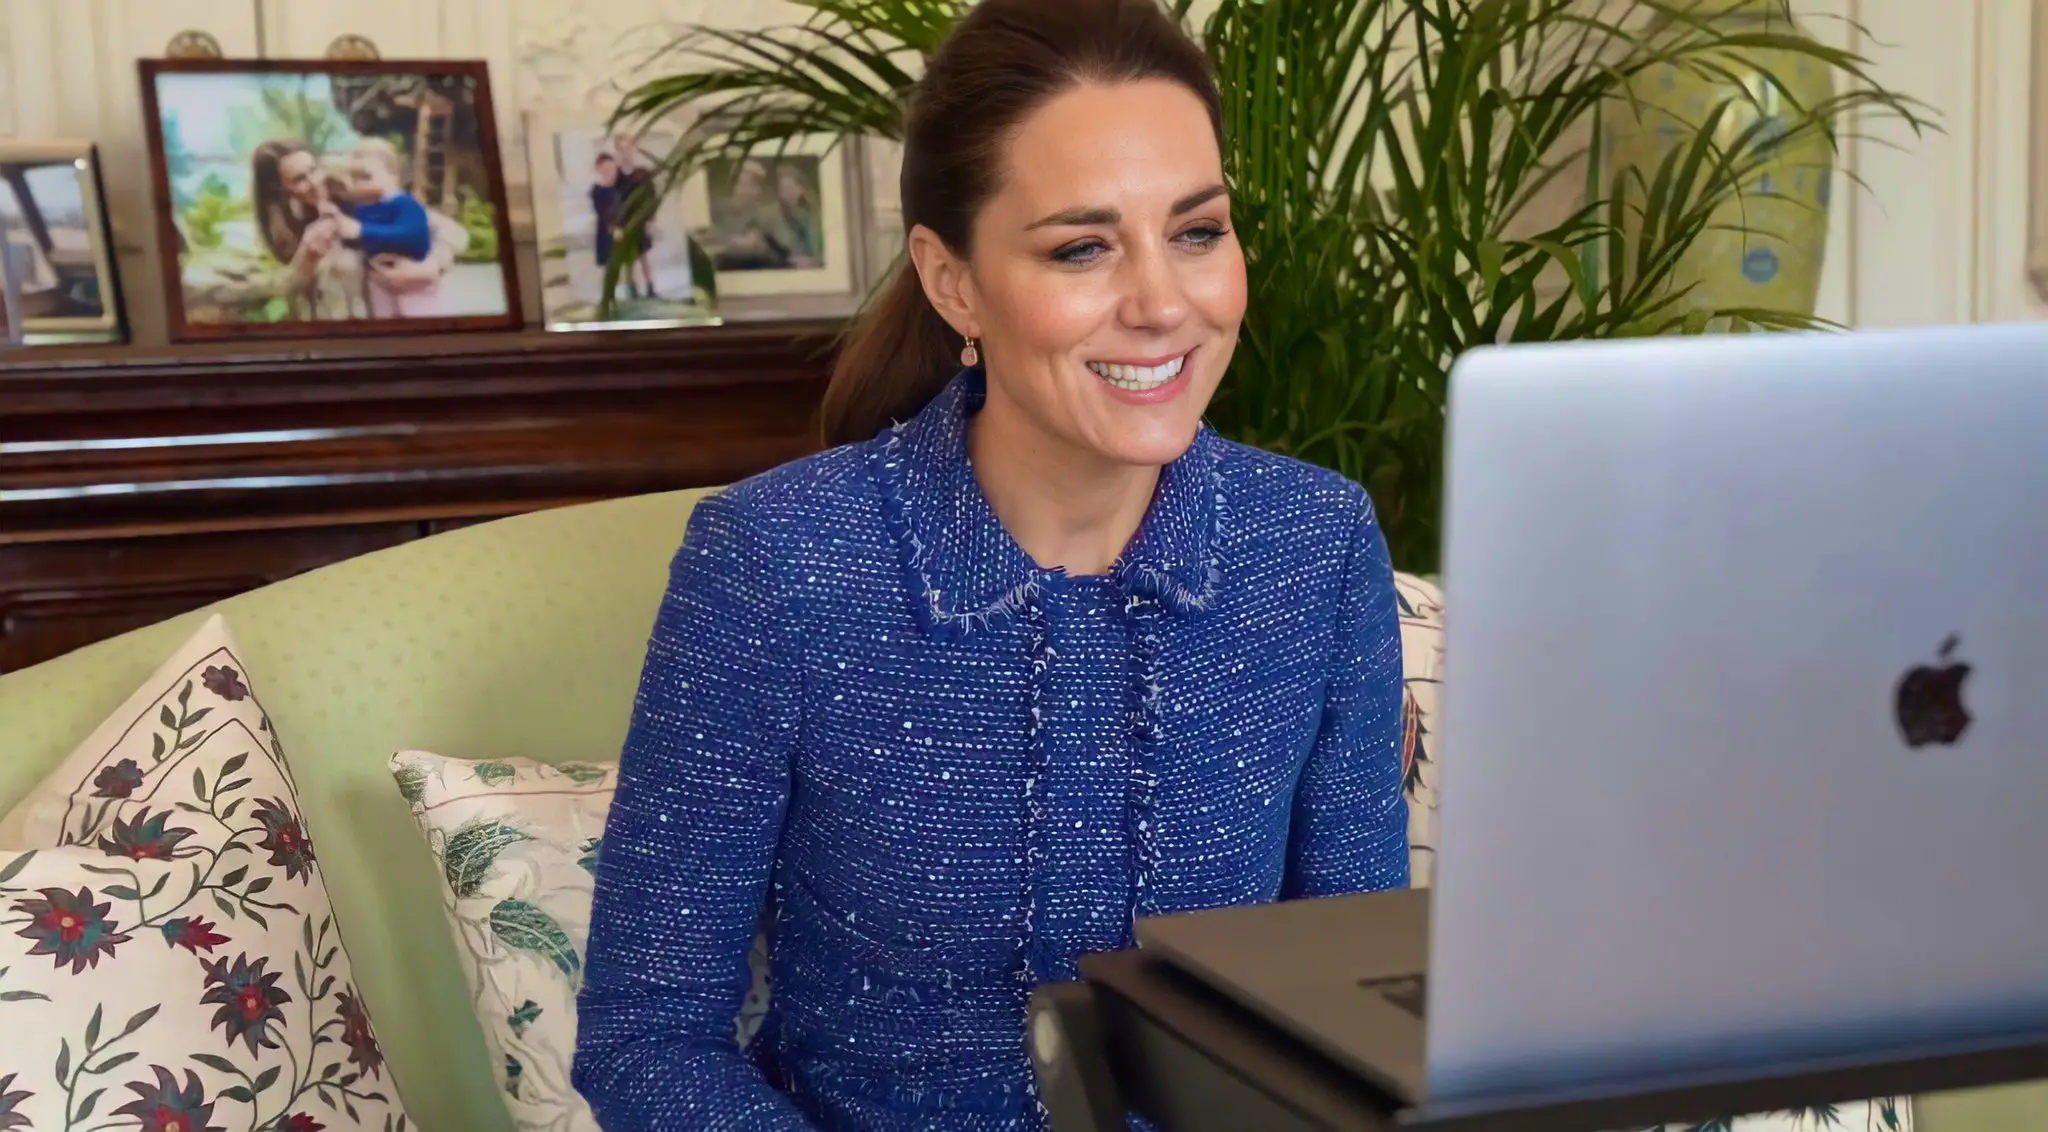 The Duchess of Cambridge, Patron of Place2Be, made a series of video calls and spoke one-on-one with teachers from Ribbon Academy in County Durham to mark the Children's Mental Health Week